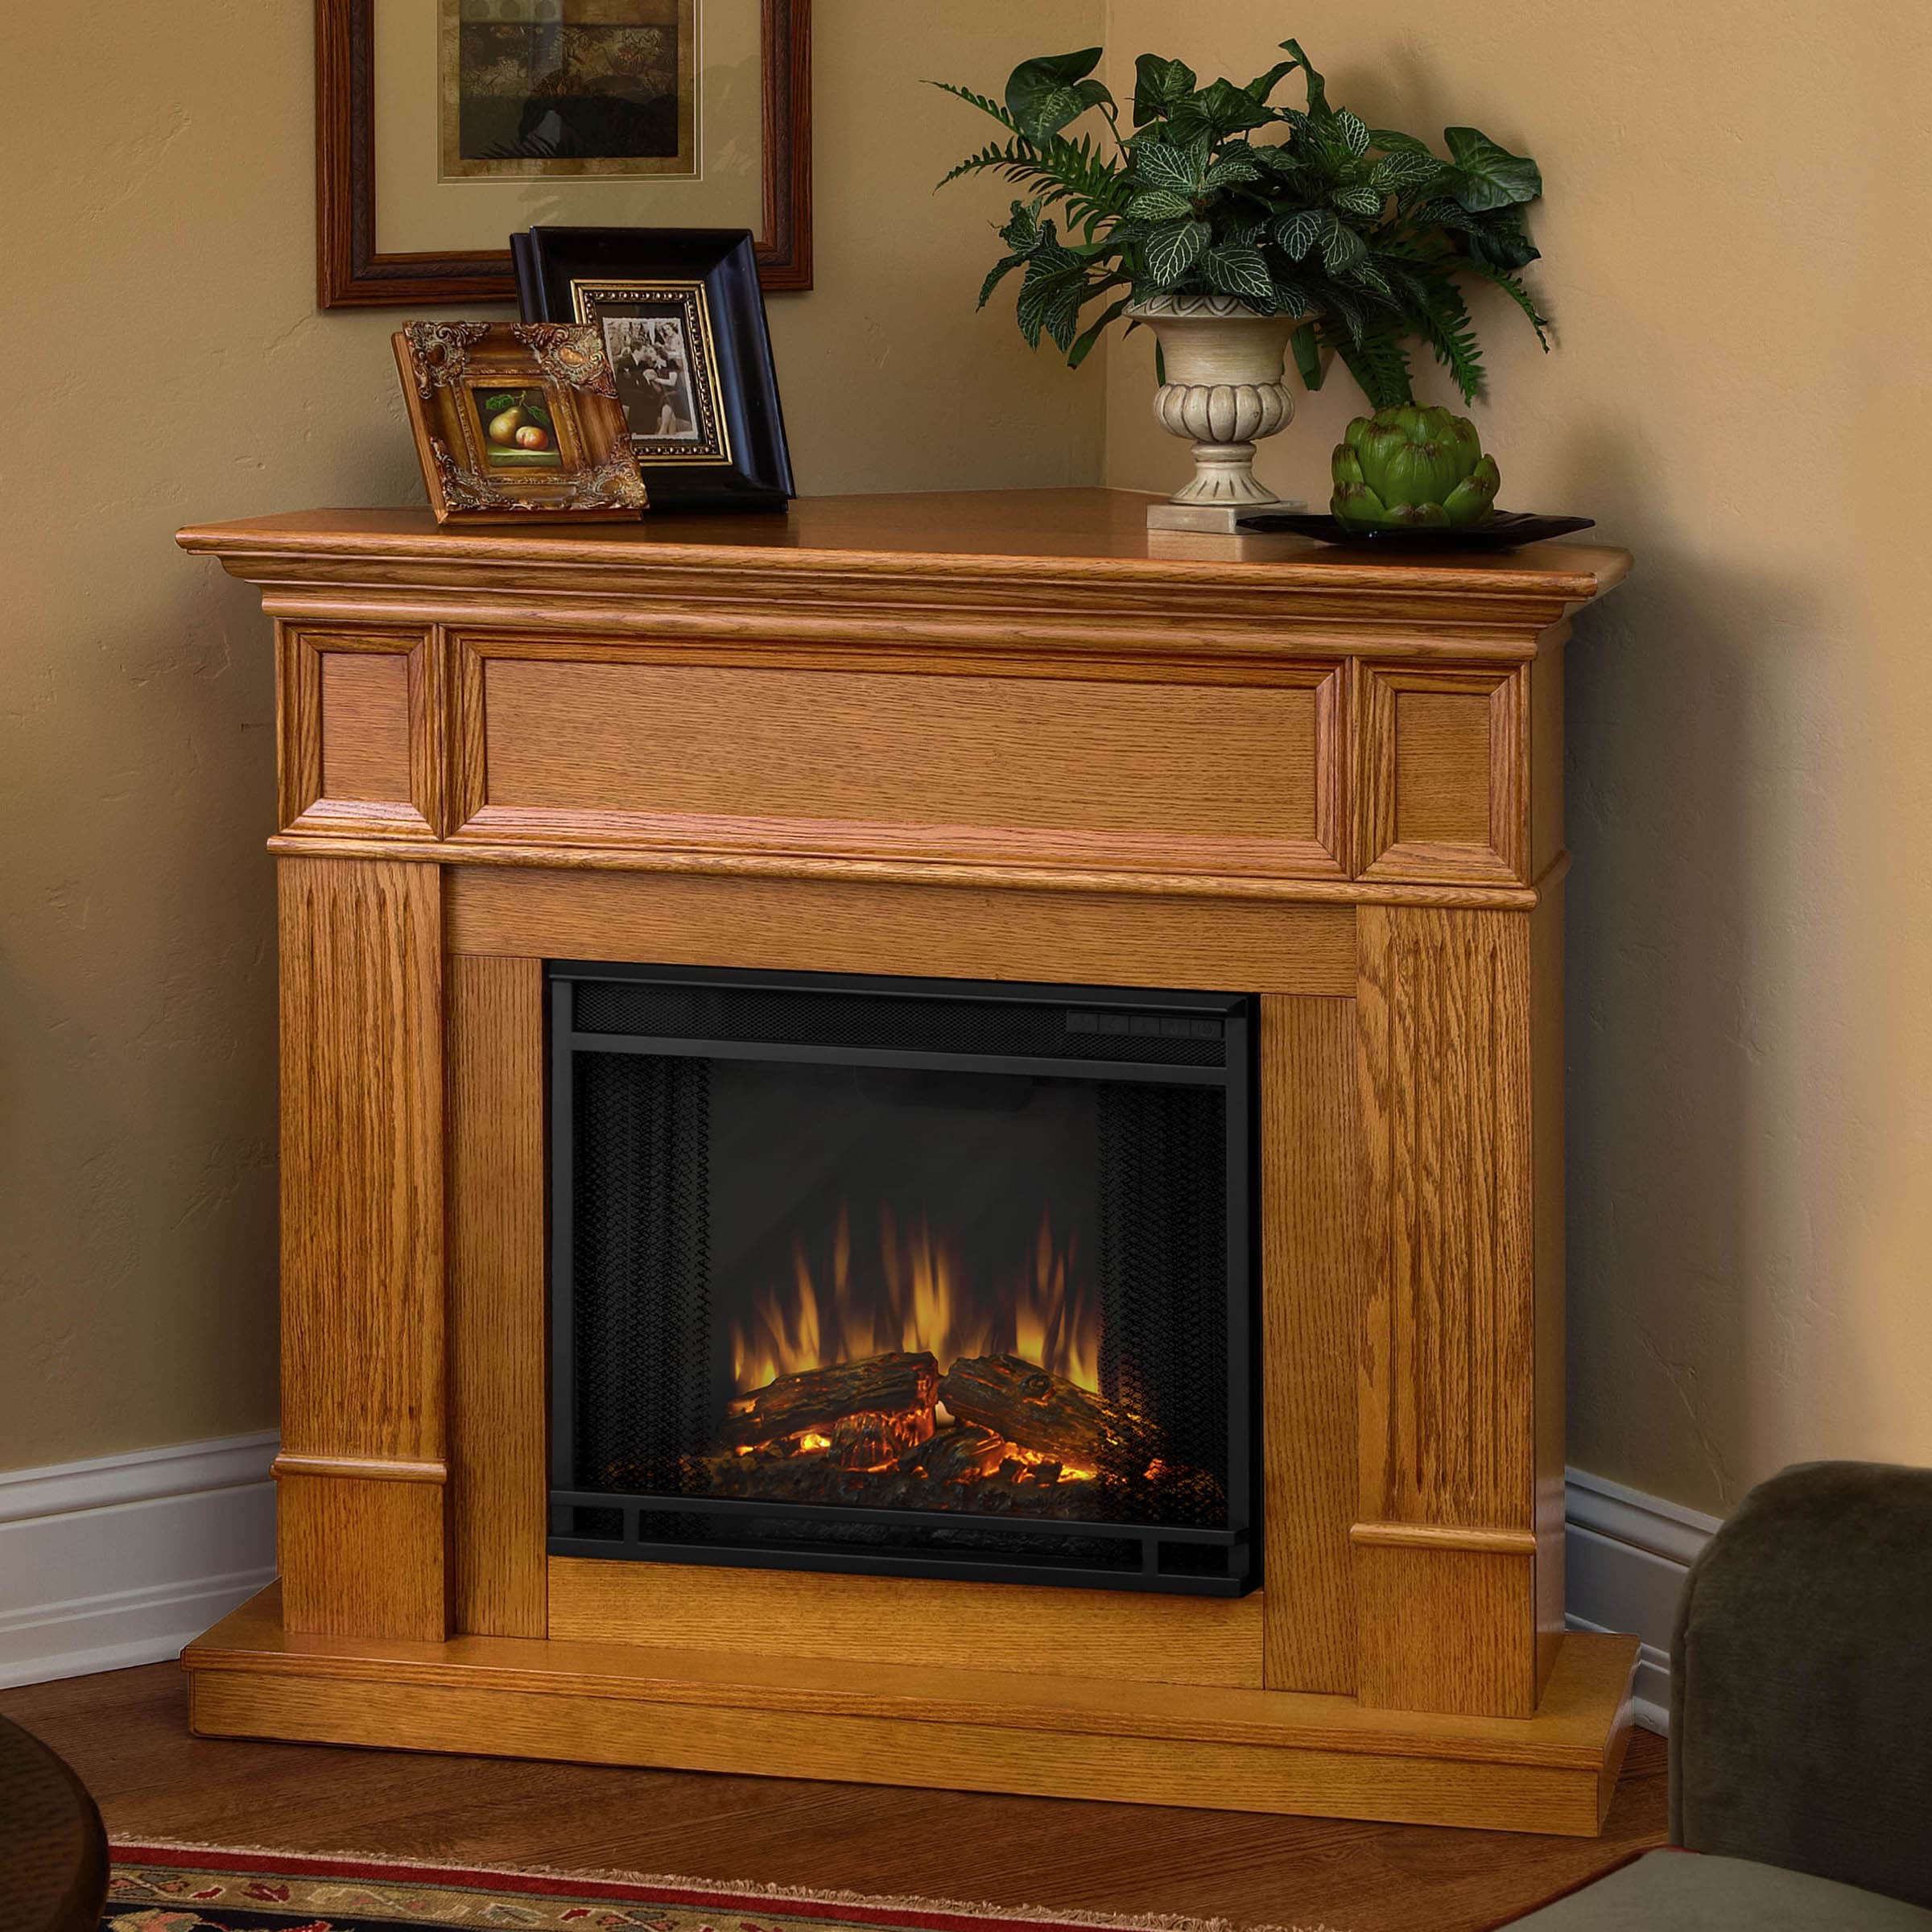 How To Light An Electric Fireplace?  